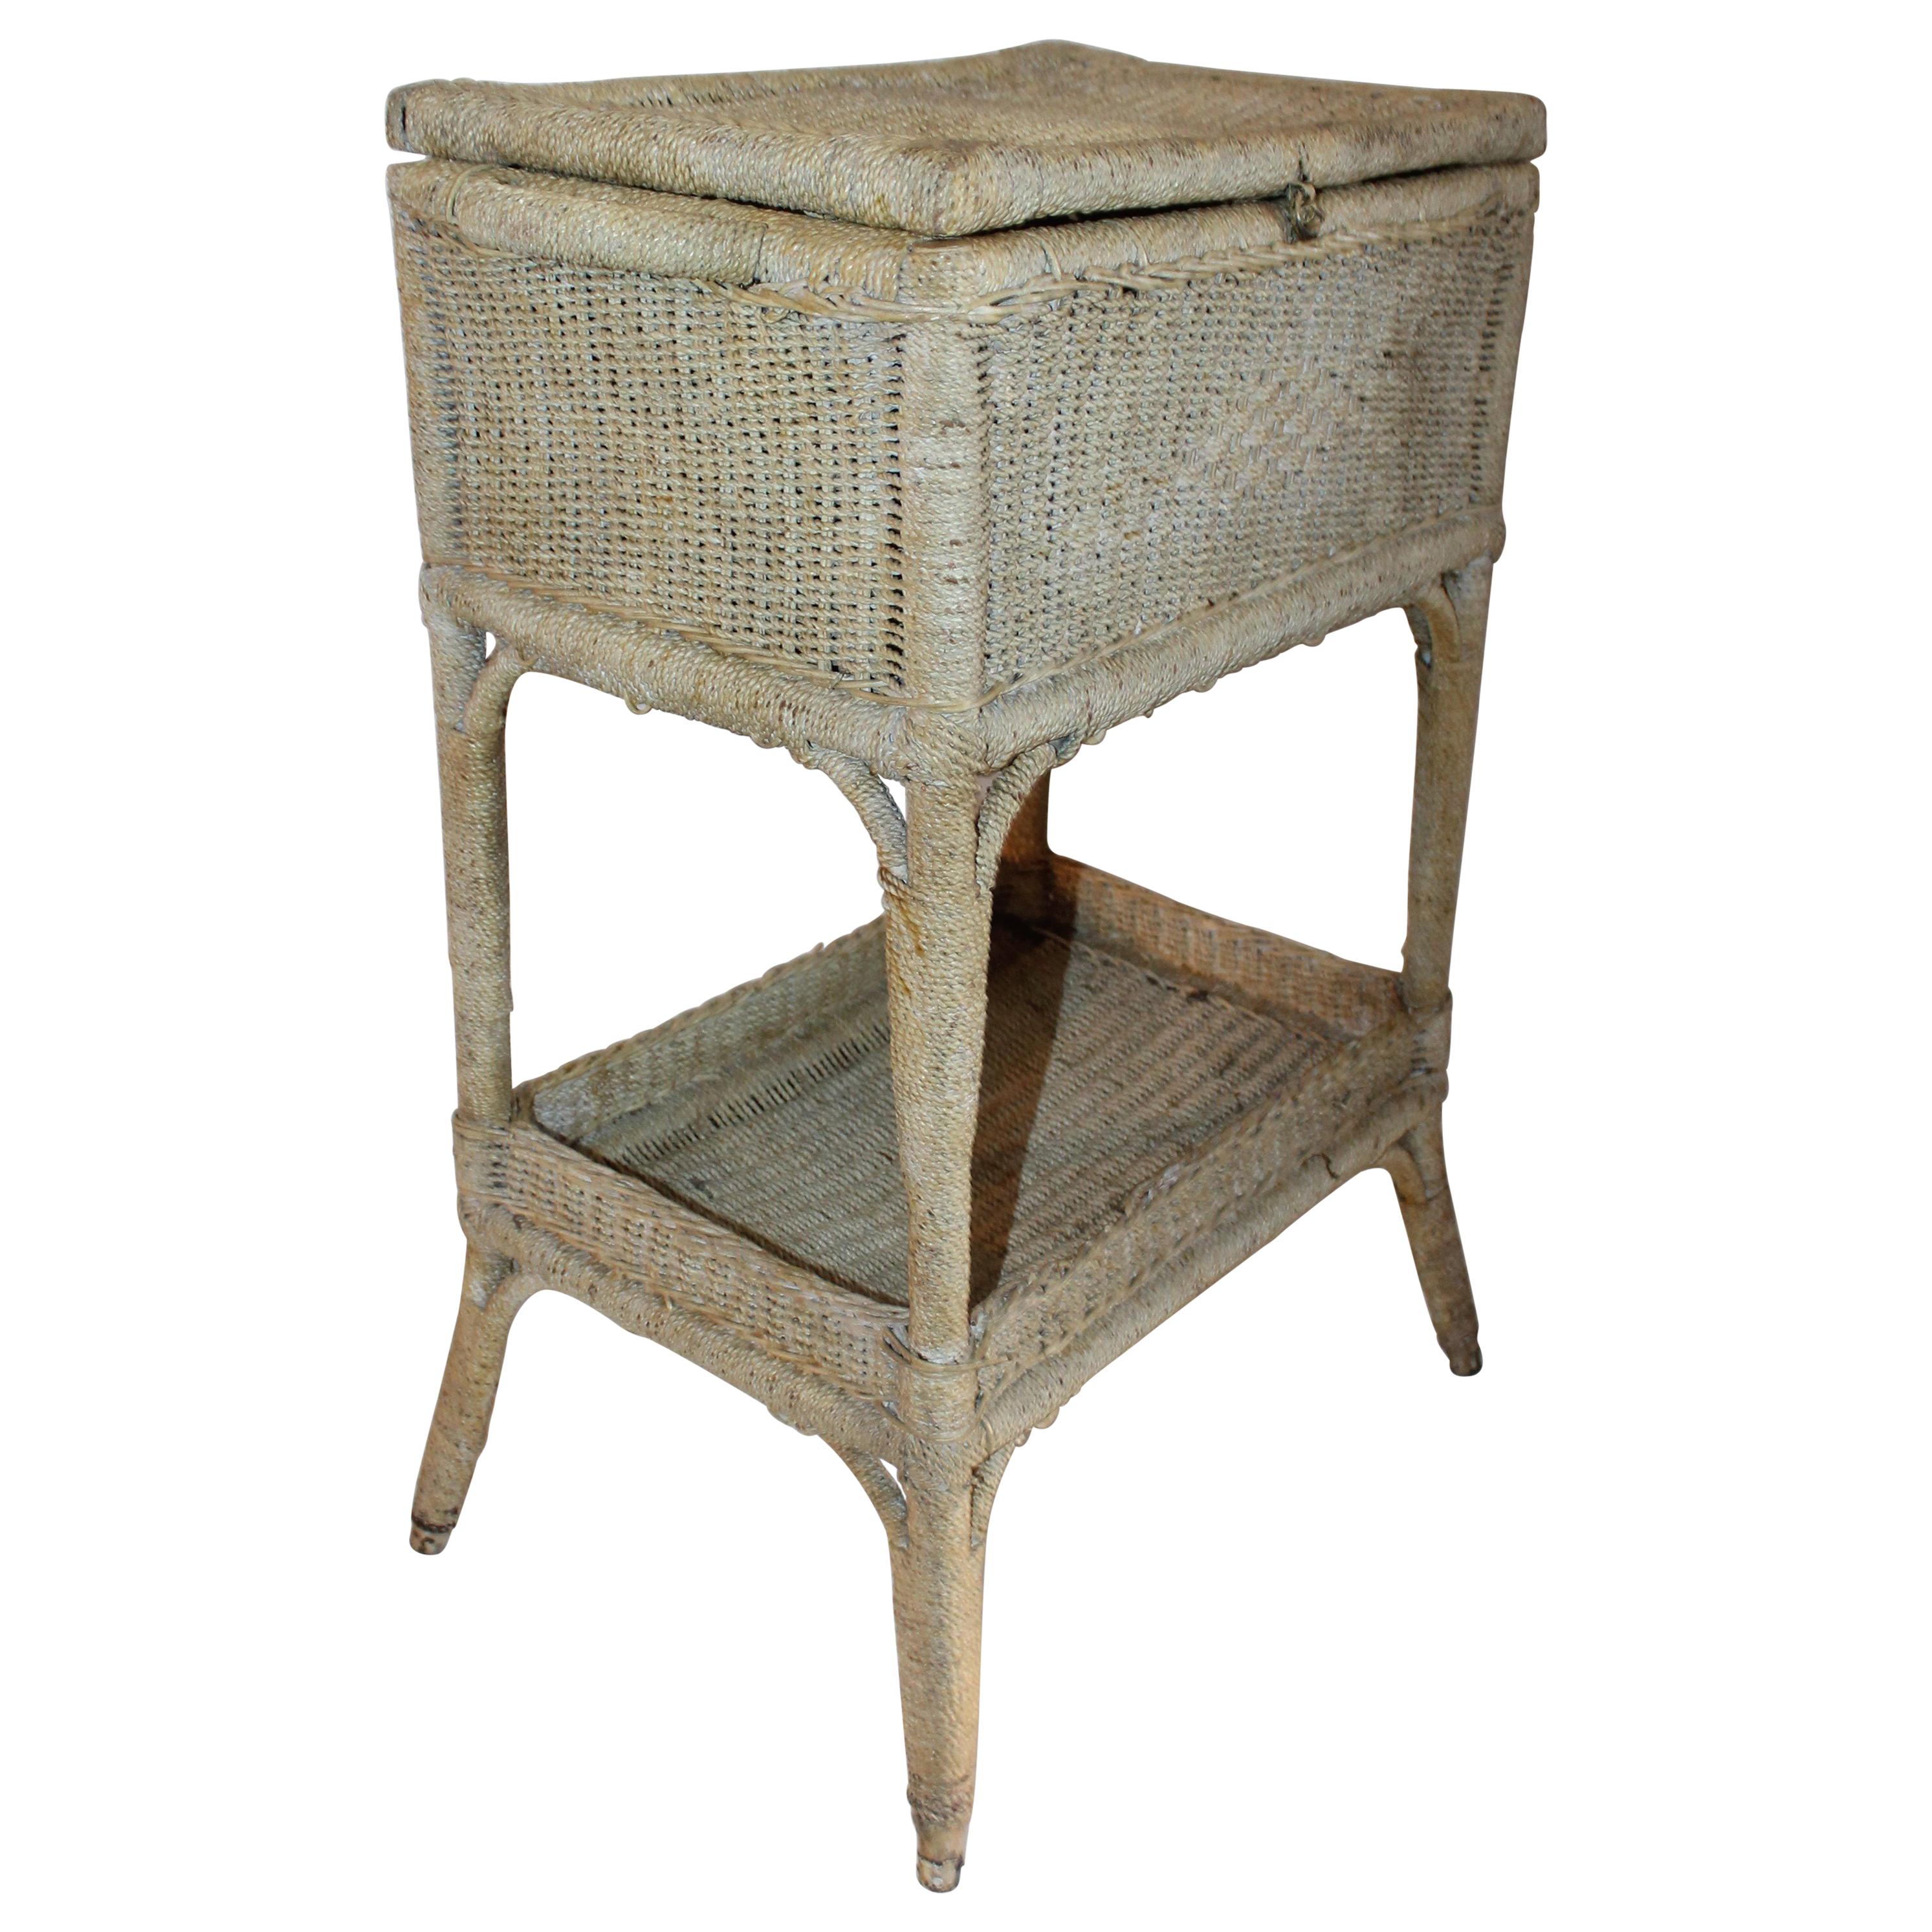 Early 20th Century Original Painted Sea Grass Side Table